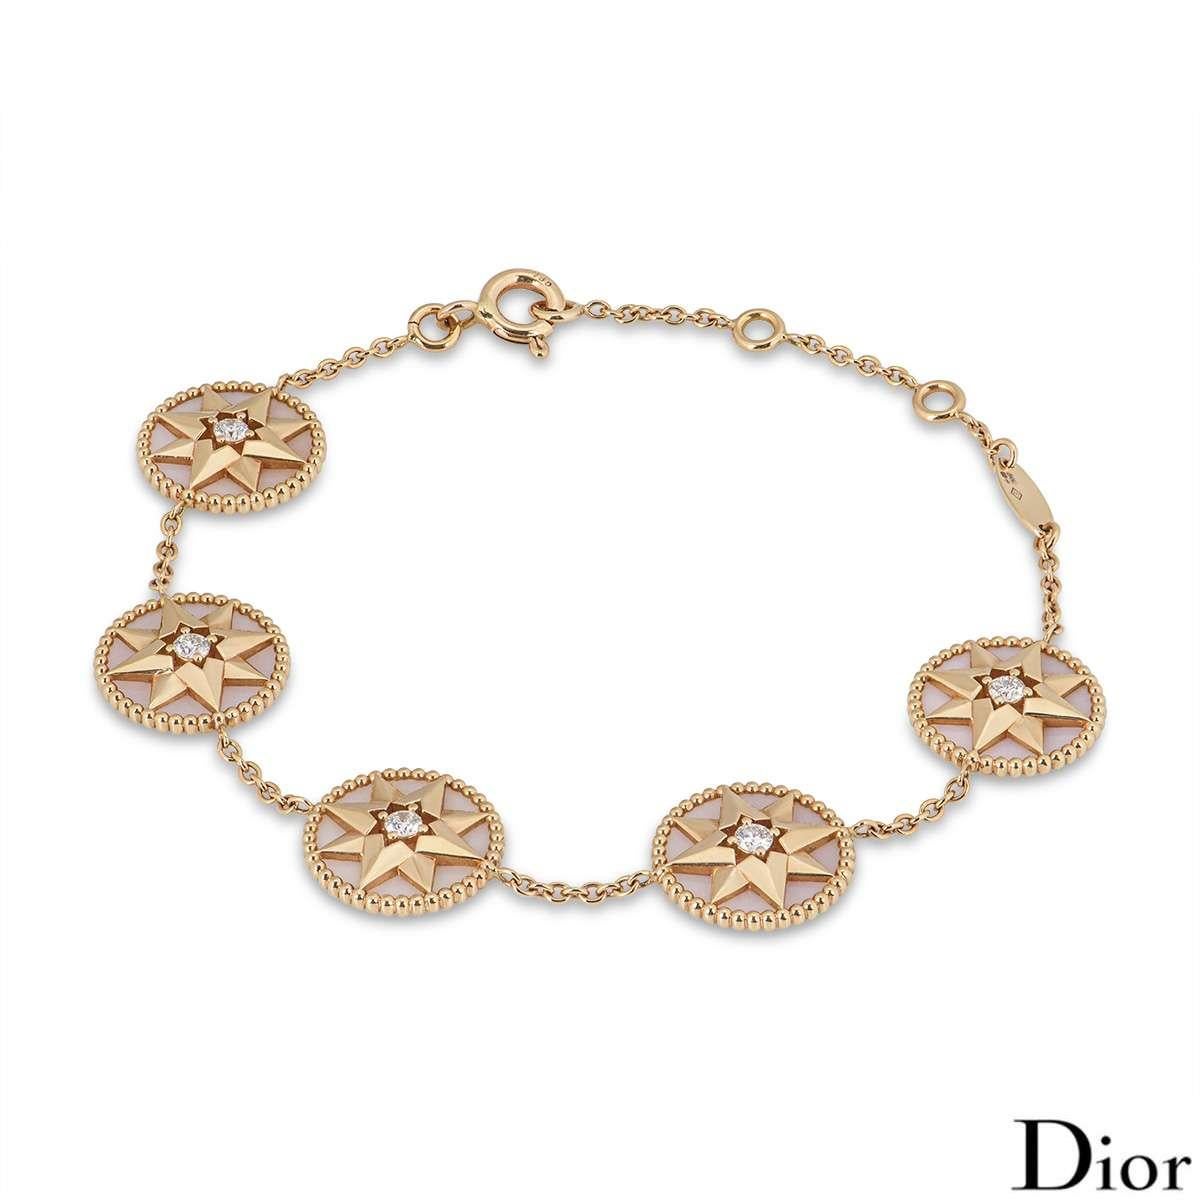 An 18k rose gold diamond and pink opal Dior bracelet from the Rose des Vents collection. The bracelet features 5 pink opal circular motifs, each with a rose gold star in the centre and round brilliant cut diamonds totalling approximately 0.21ct. The